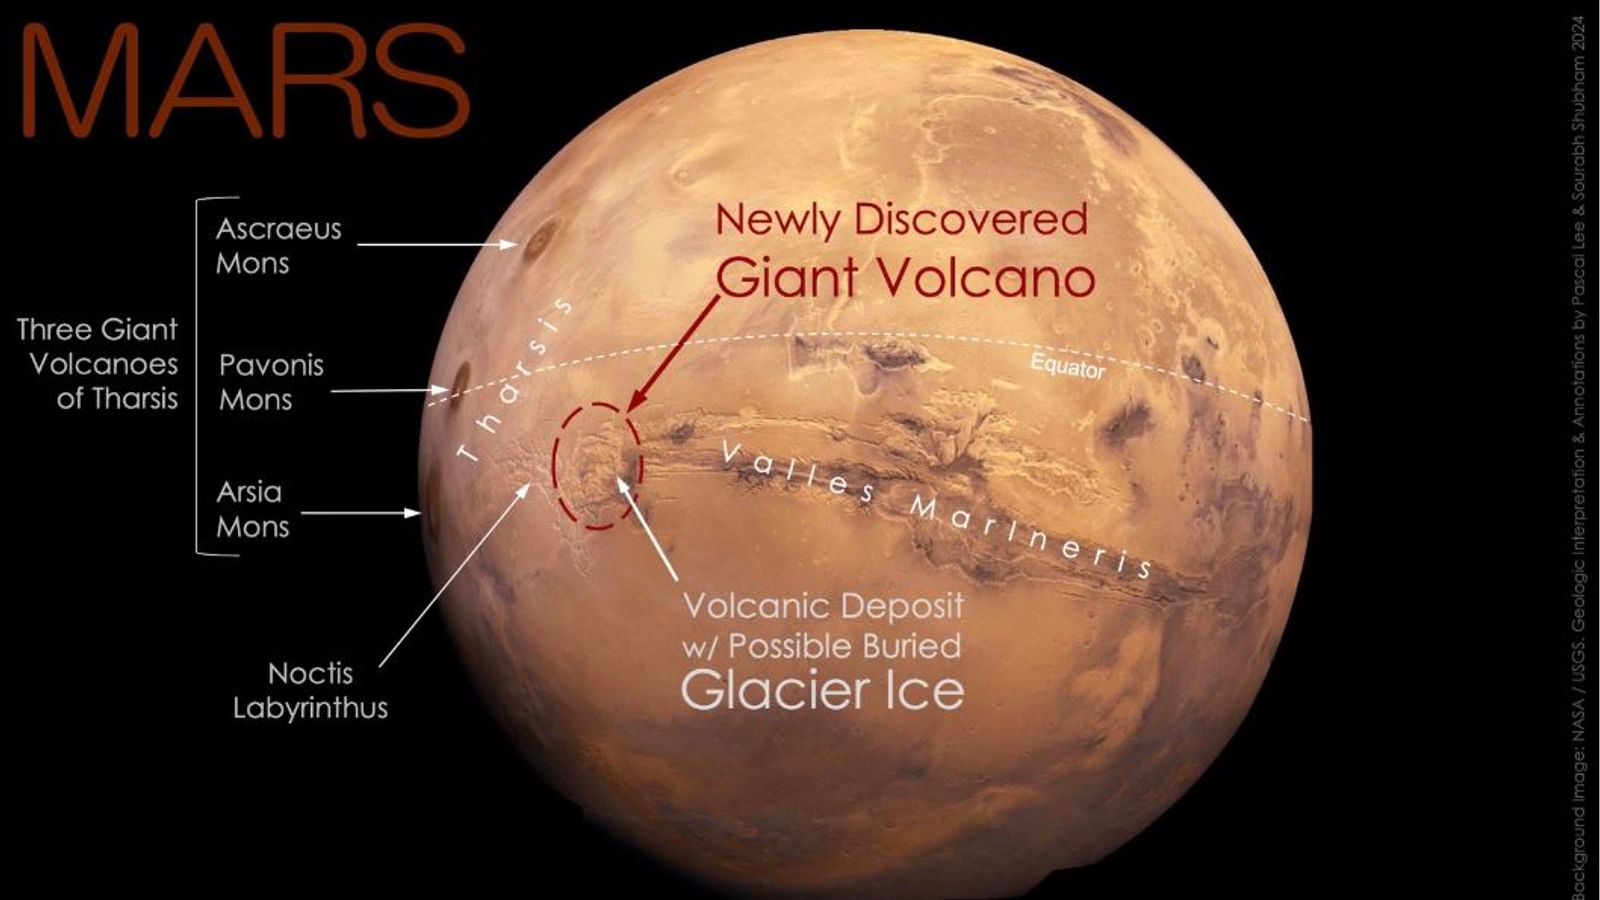 Giant volcano spanning 280 miles discovered on Mars, scientists say | Science & Tech News